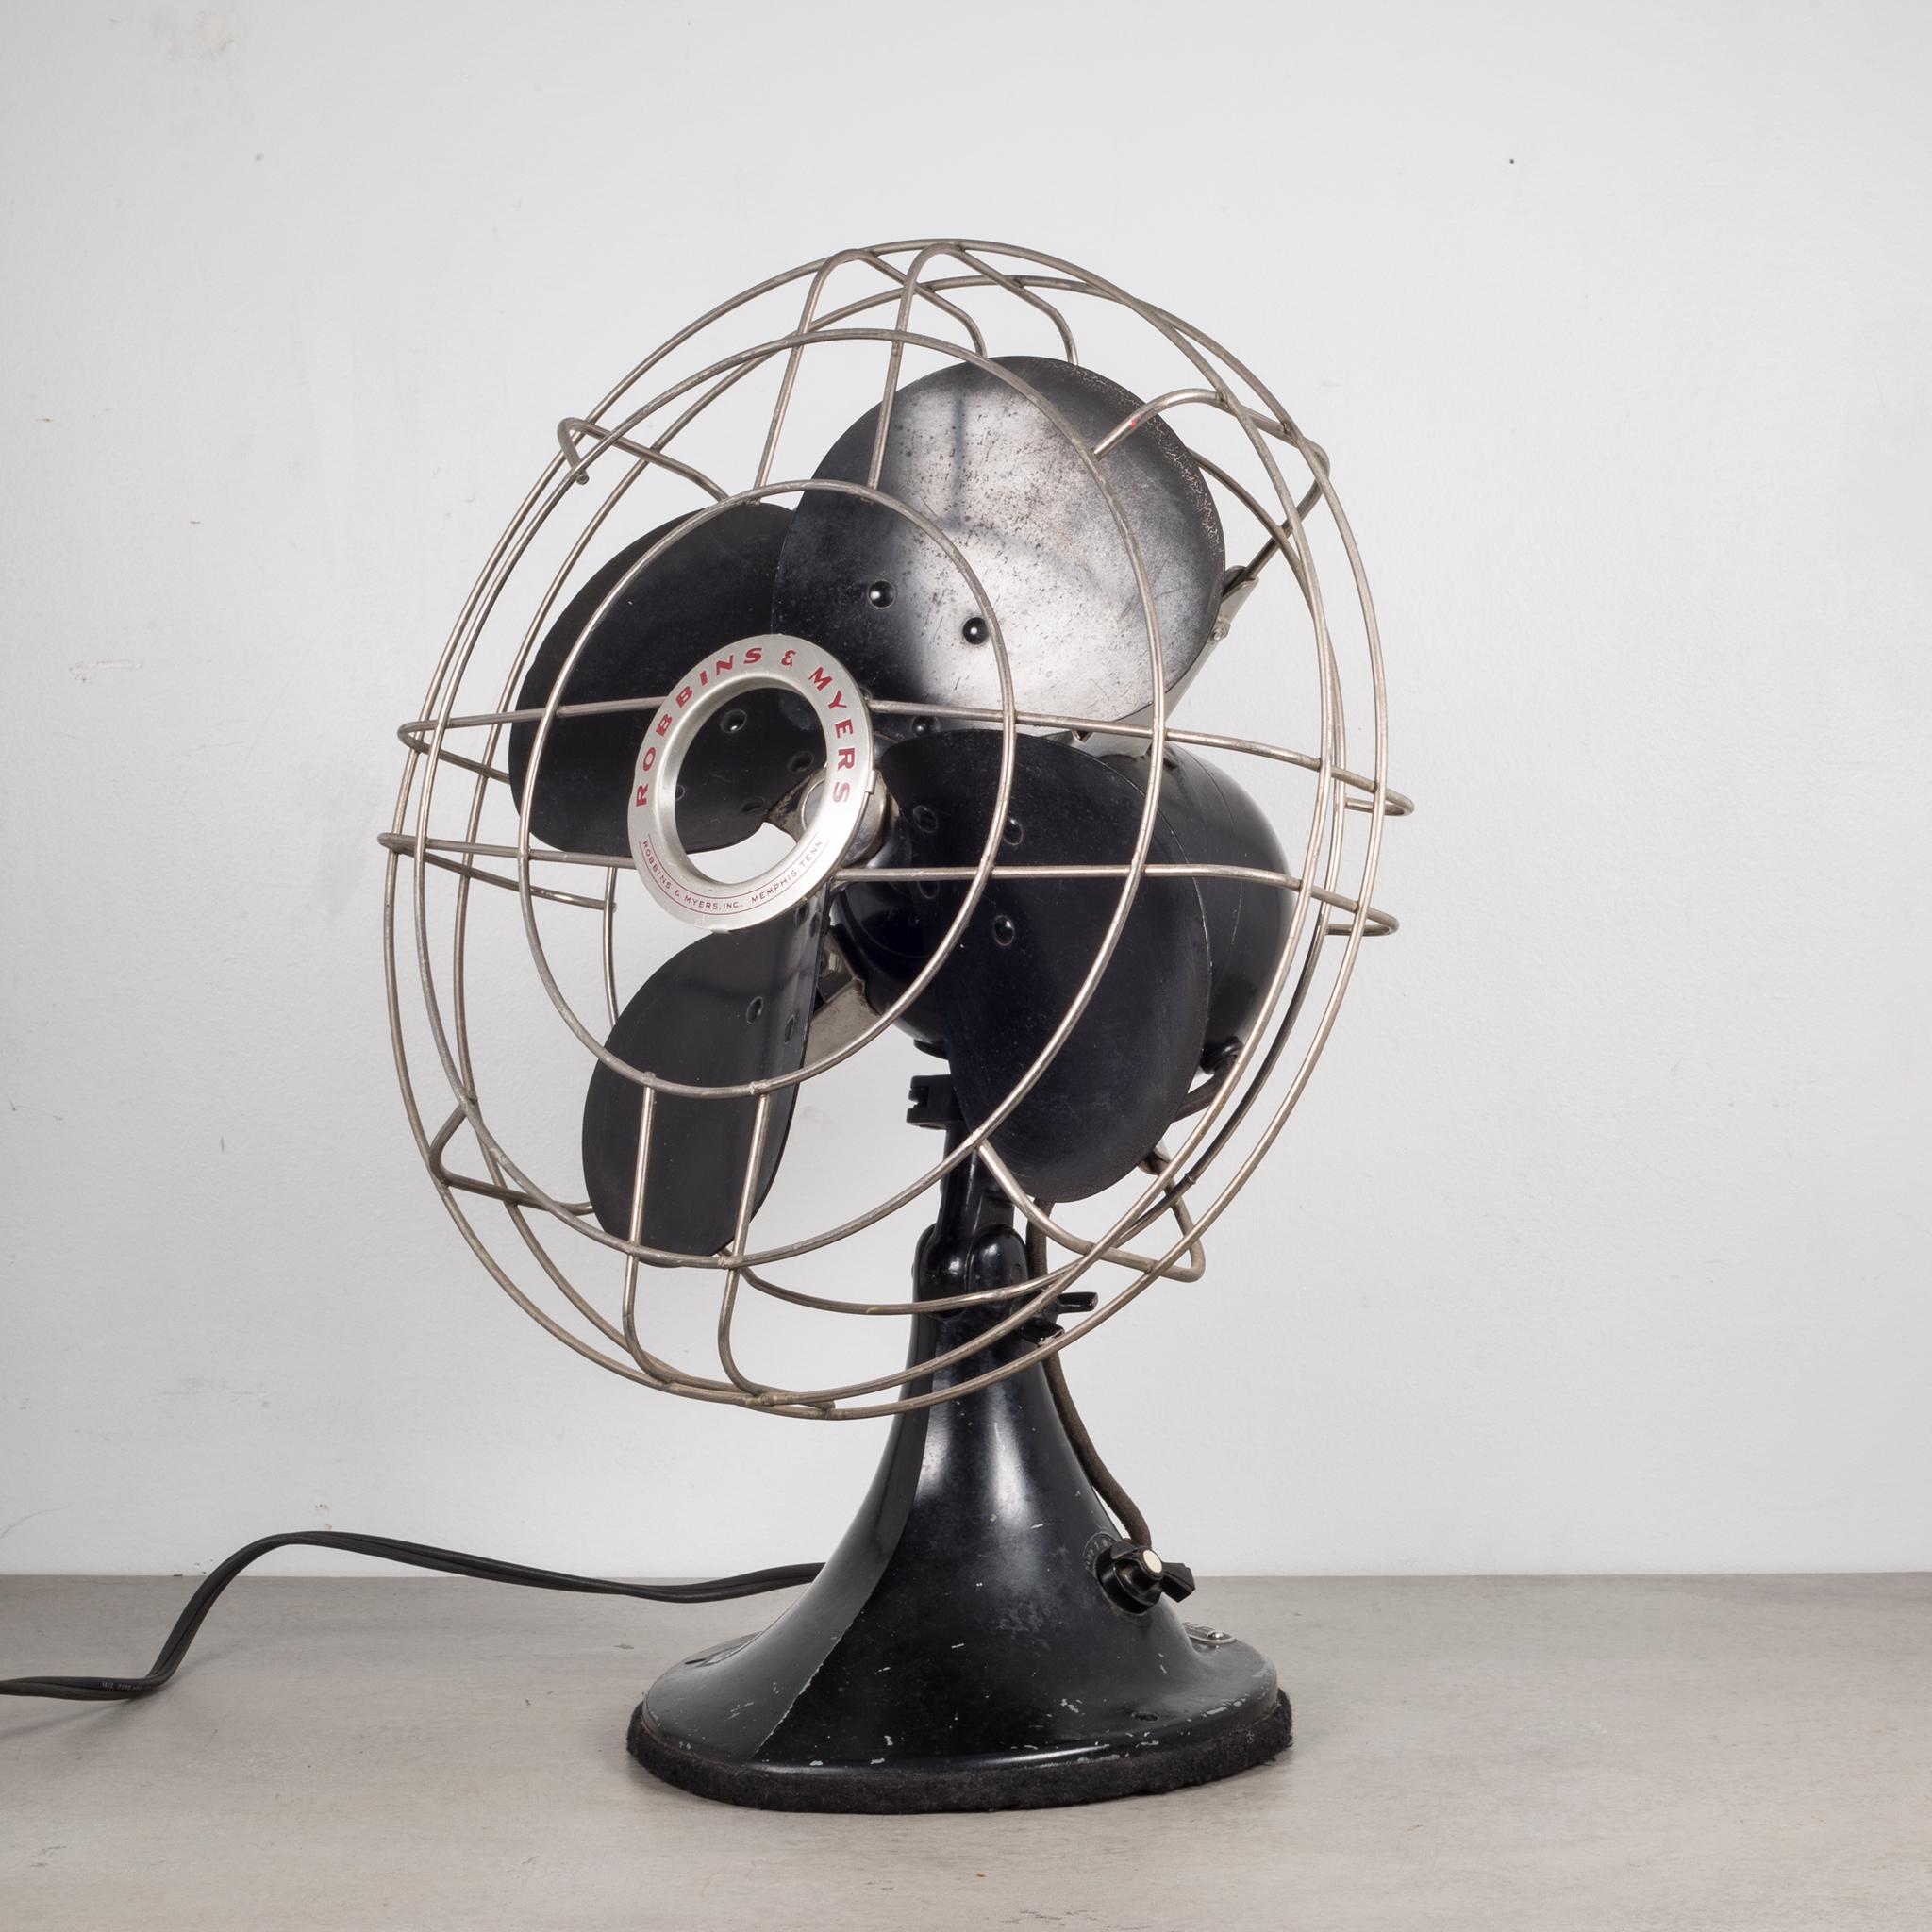 About

This is an original steel and metal Robbins & Myers oscillating fan with tilting head and three power settings. Rewired and in excellent working condition with quiet but powerful settings.

Creator: Robbins & Myers.
Date of manufacture: